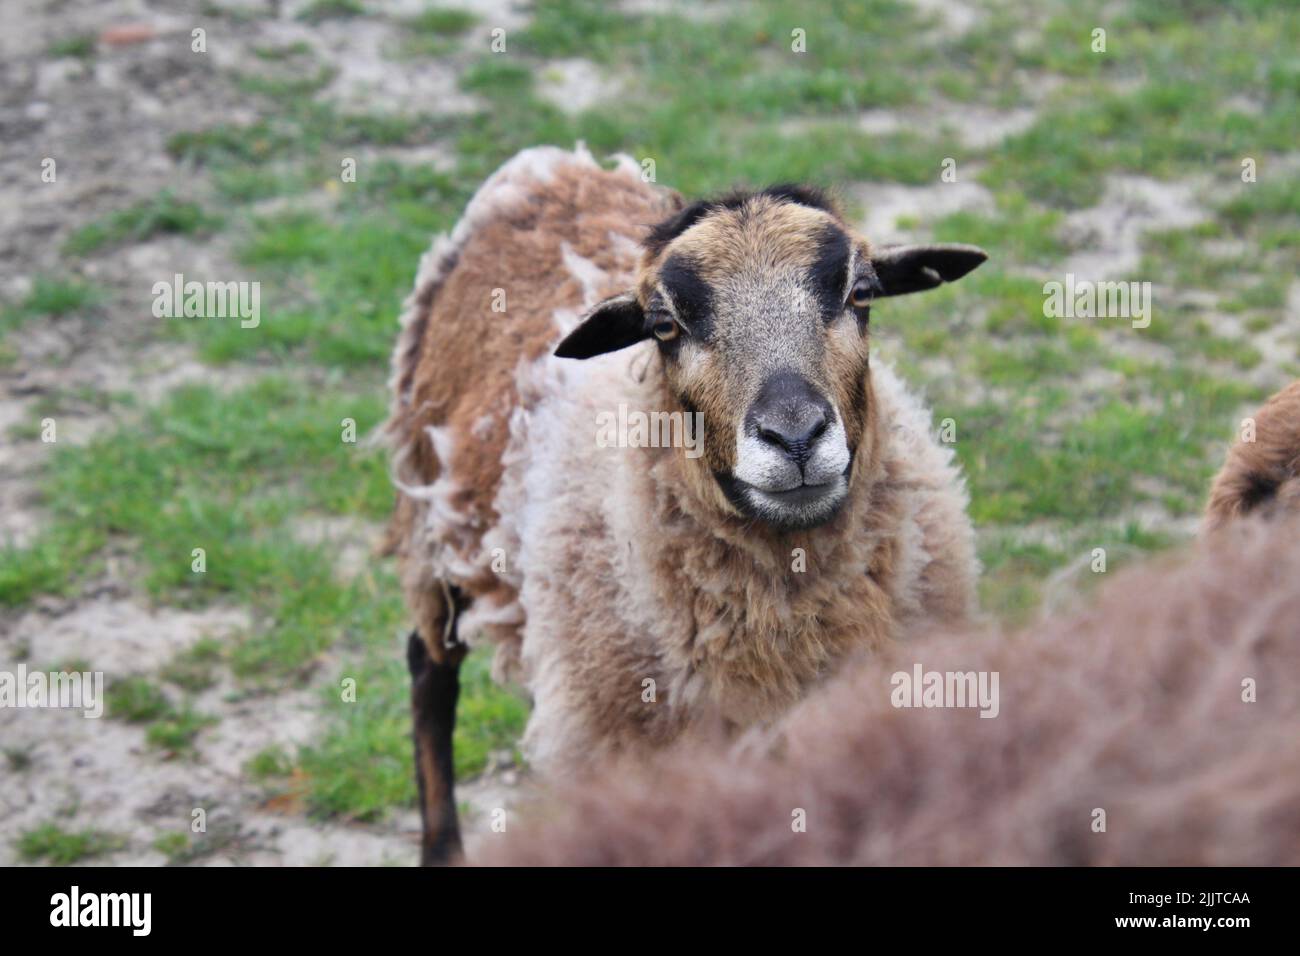 A closeup of a Cameroon sheep standing on a grass Stock Photo